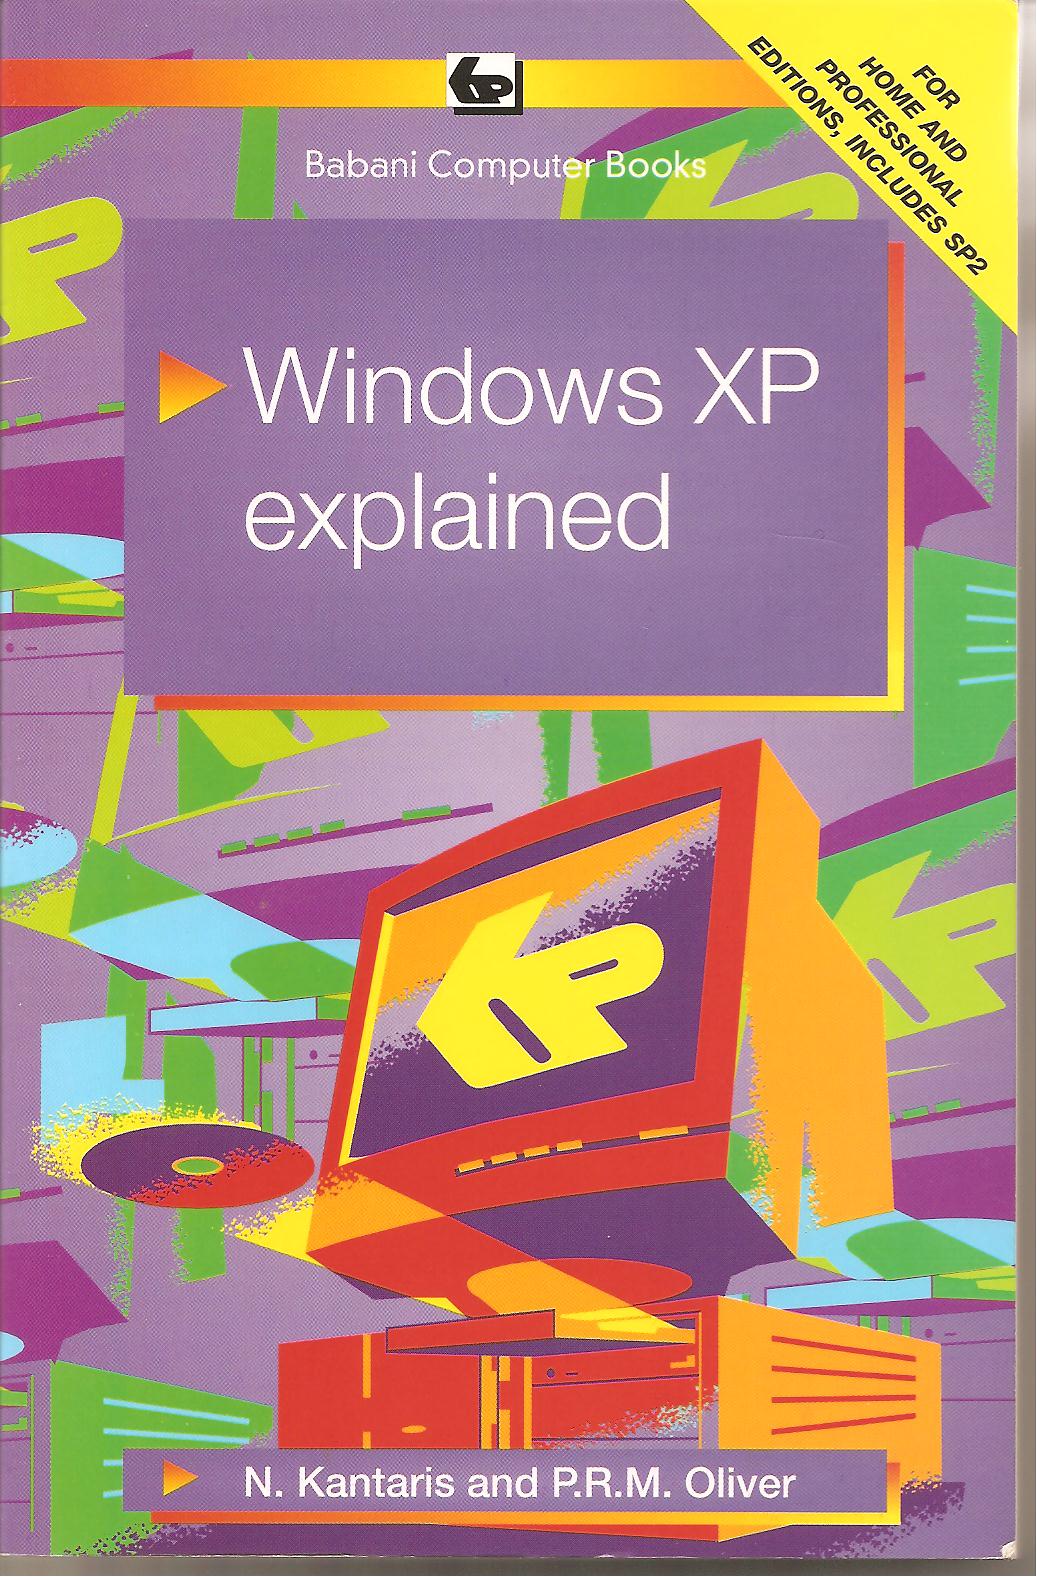 Windows XP explained book front